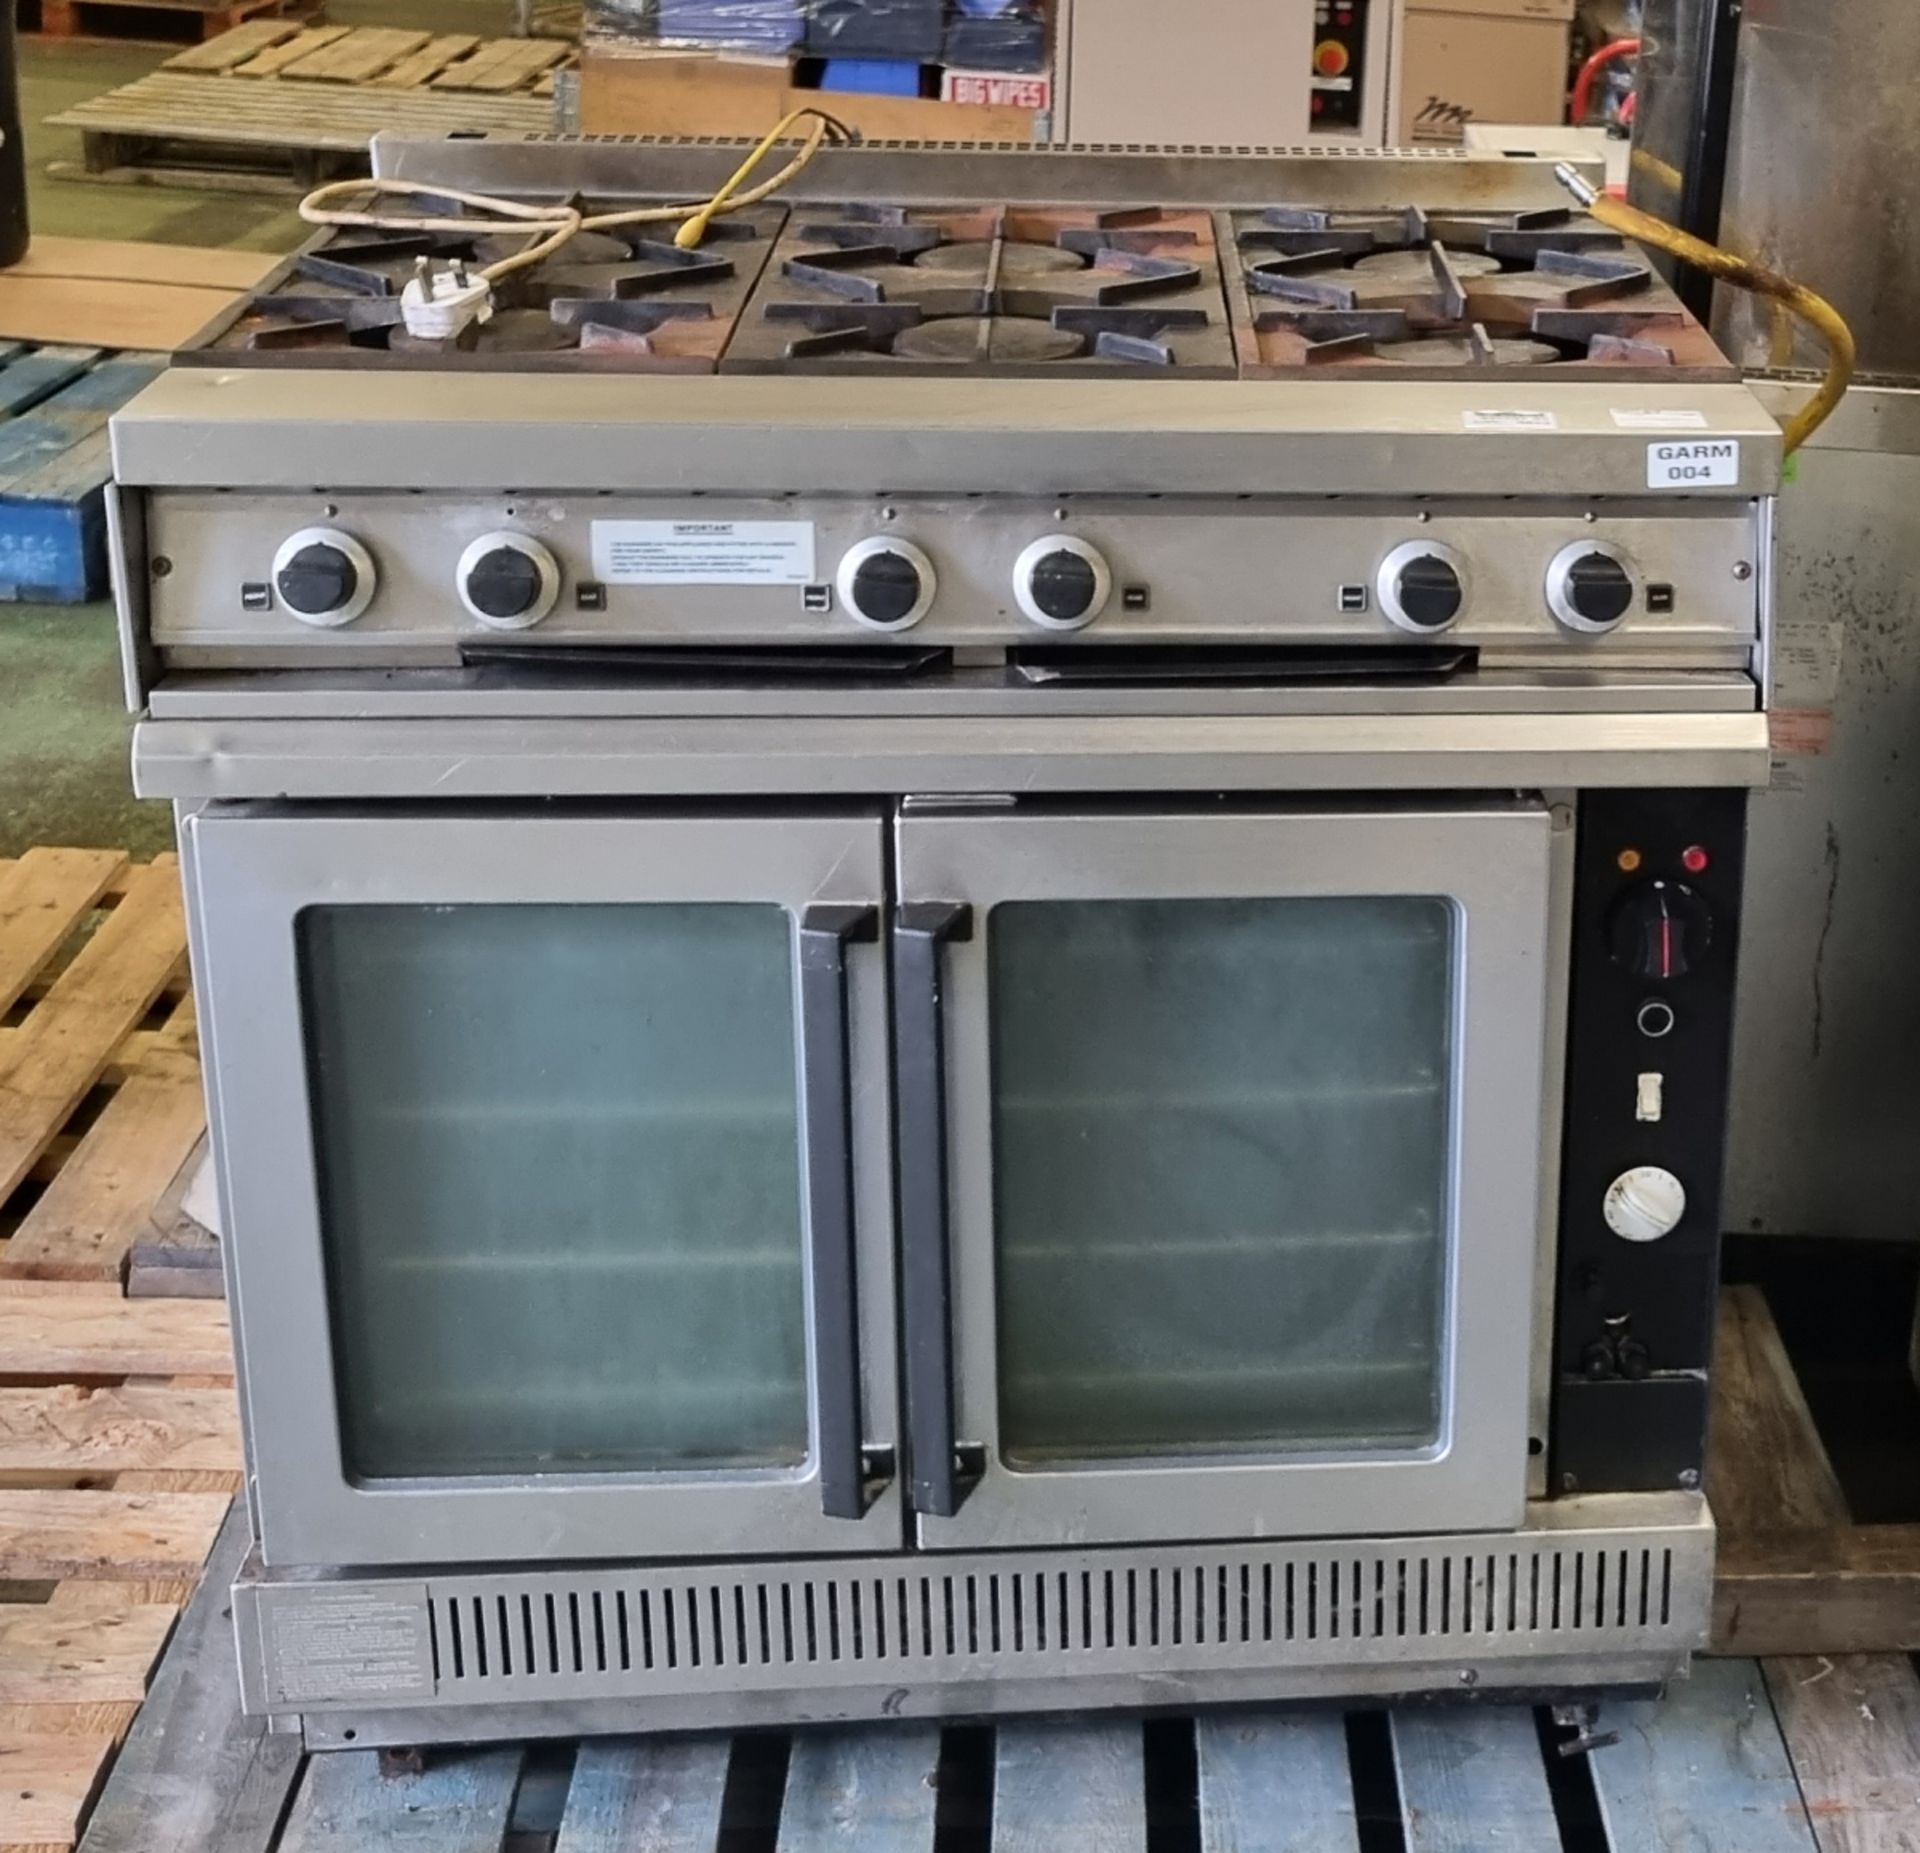 6 ring commercial gas oven - W 900 x D 770 x H 900mm